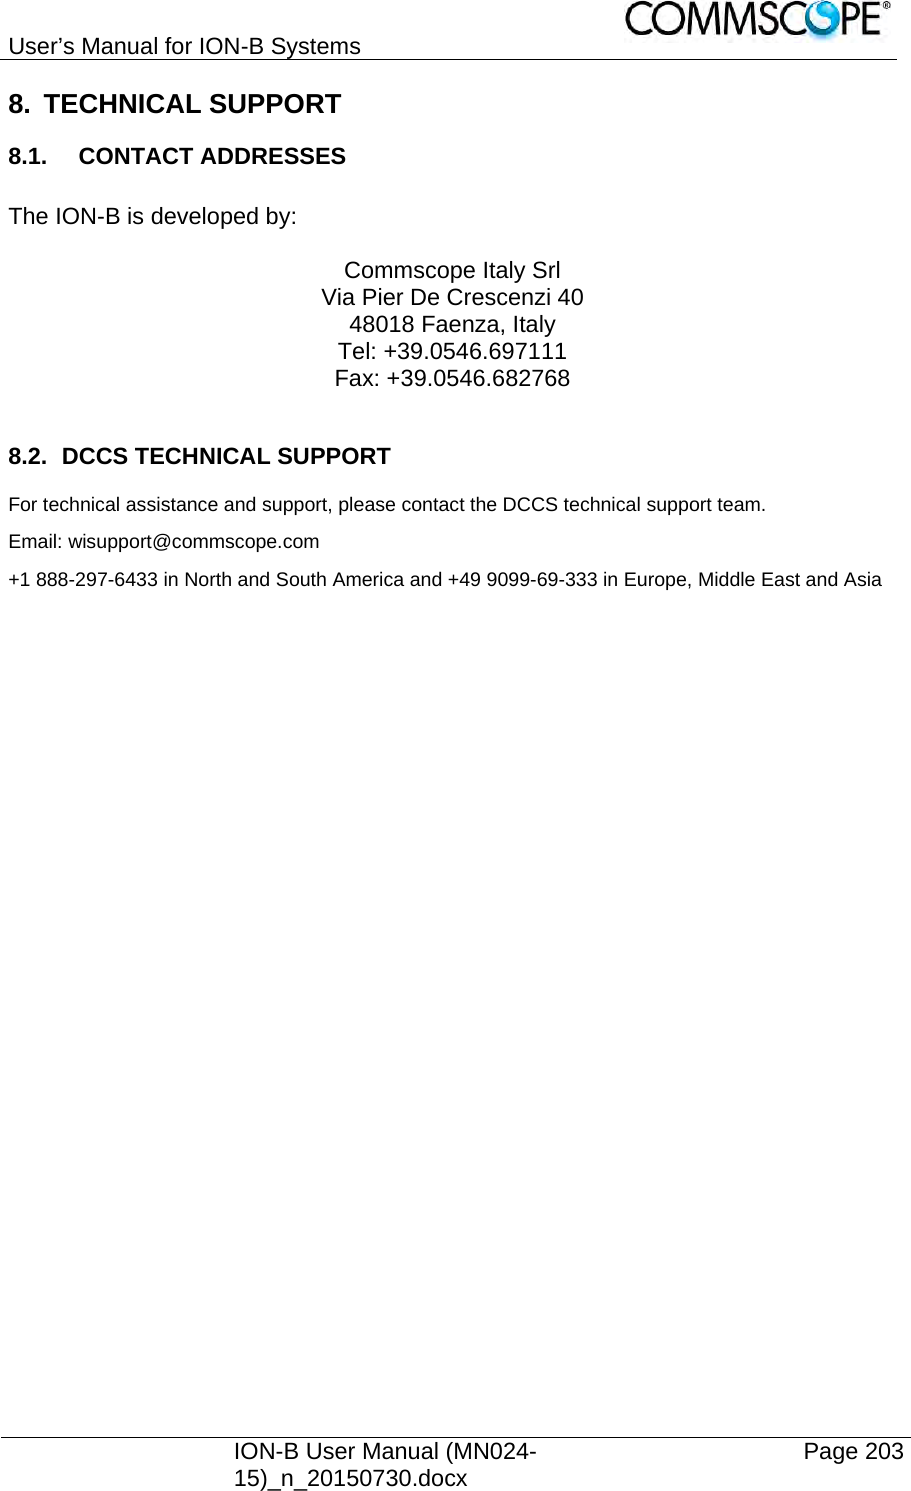 User’s Manual for ION-B Systems    ION-B User Manual (MN024-15)_n_20150730.docx  Page 203 8. TECHNICAL SUPPORT 8.1. CONTACT ADDRESSES  The ION-B is developed by:  Commscope Italy Srl Via Pier De Crescenzi 40 48018 Faenza, Italy Tel: +39.0546.697111 Fax: +39.0546.682768  8.2. DCCS TECHNICAL SUPPORT For technical assistance and support, please contact the DCCS technical support team. Email: wisupport@commscope.com  +1 888-297-6433 in North and South America and +49 9099-69-333 in Europe, Middle East and Asia  